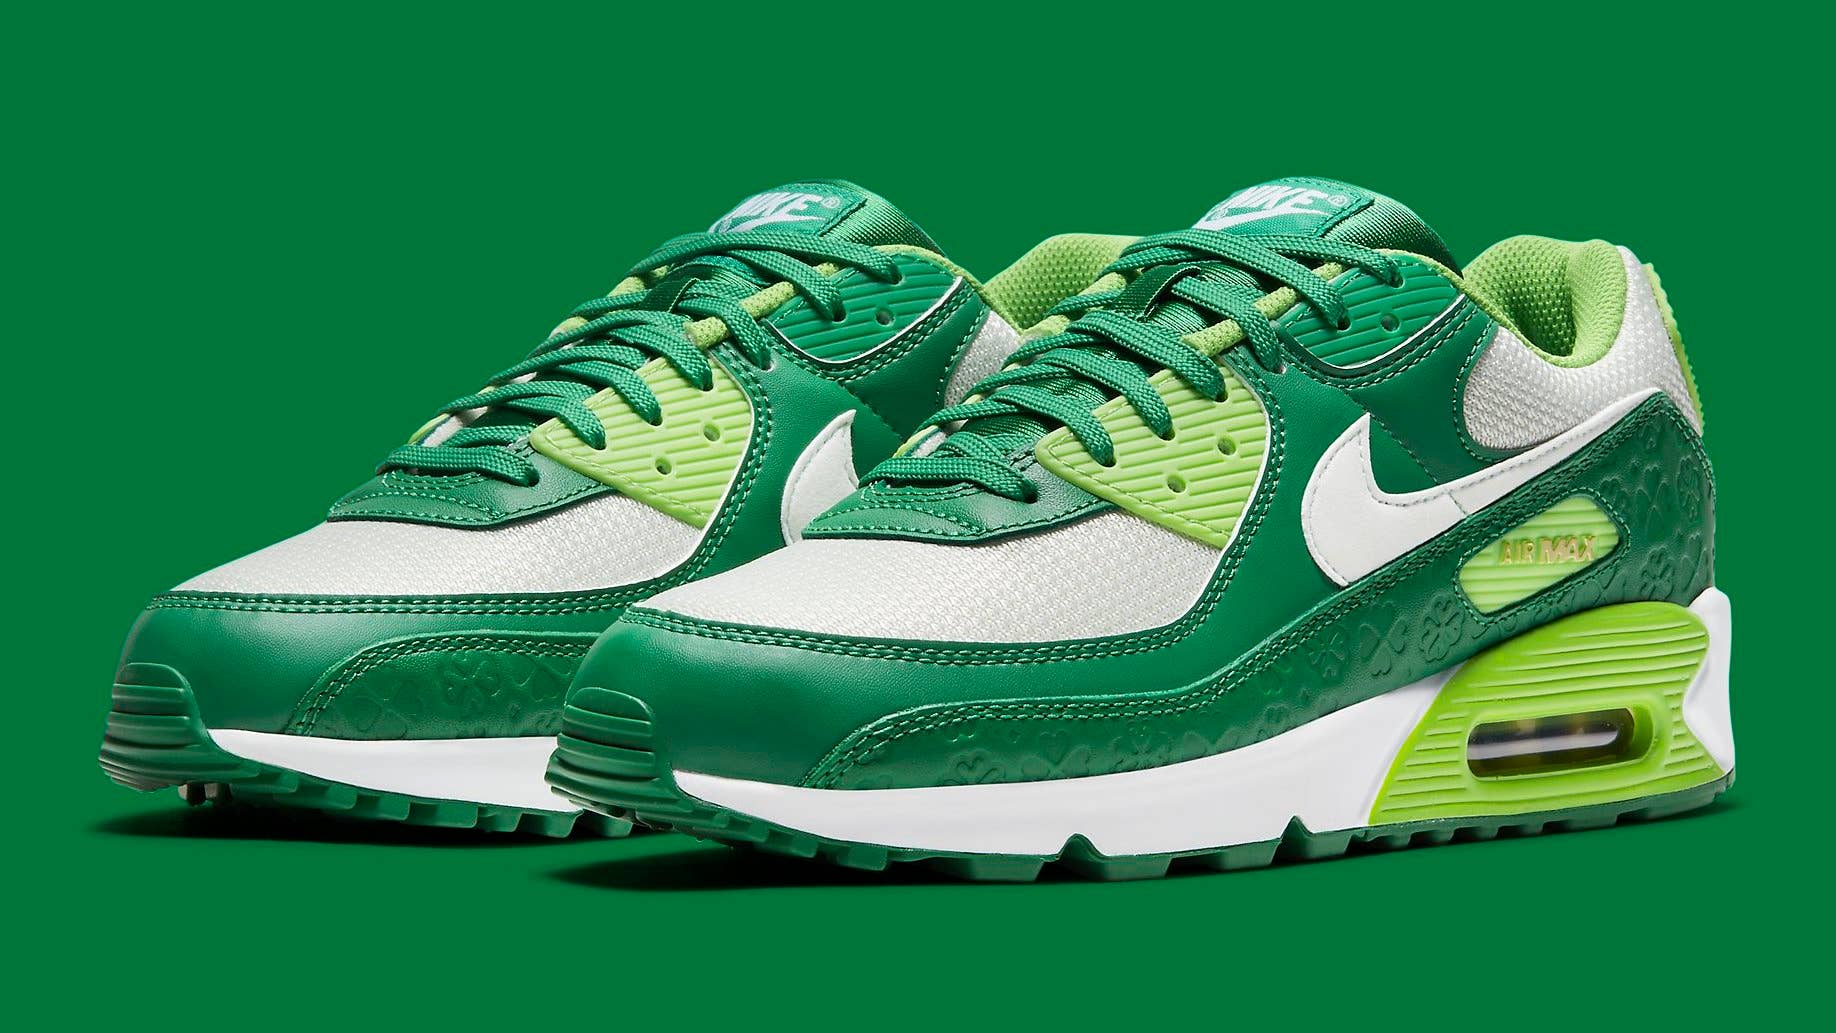 verhaal het internet brandwond Nike Is Dropping New 'St. Patrick's Day' Air Max 90s | Complex